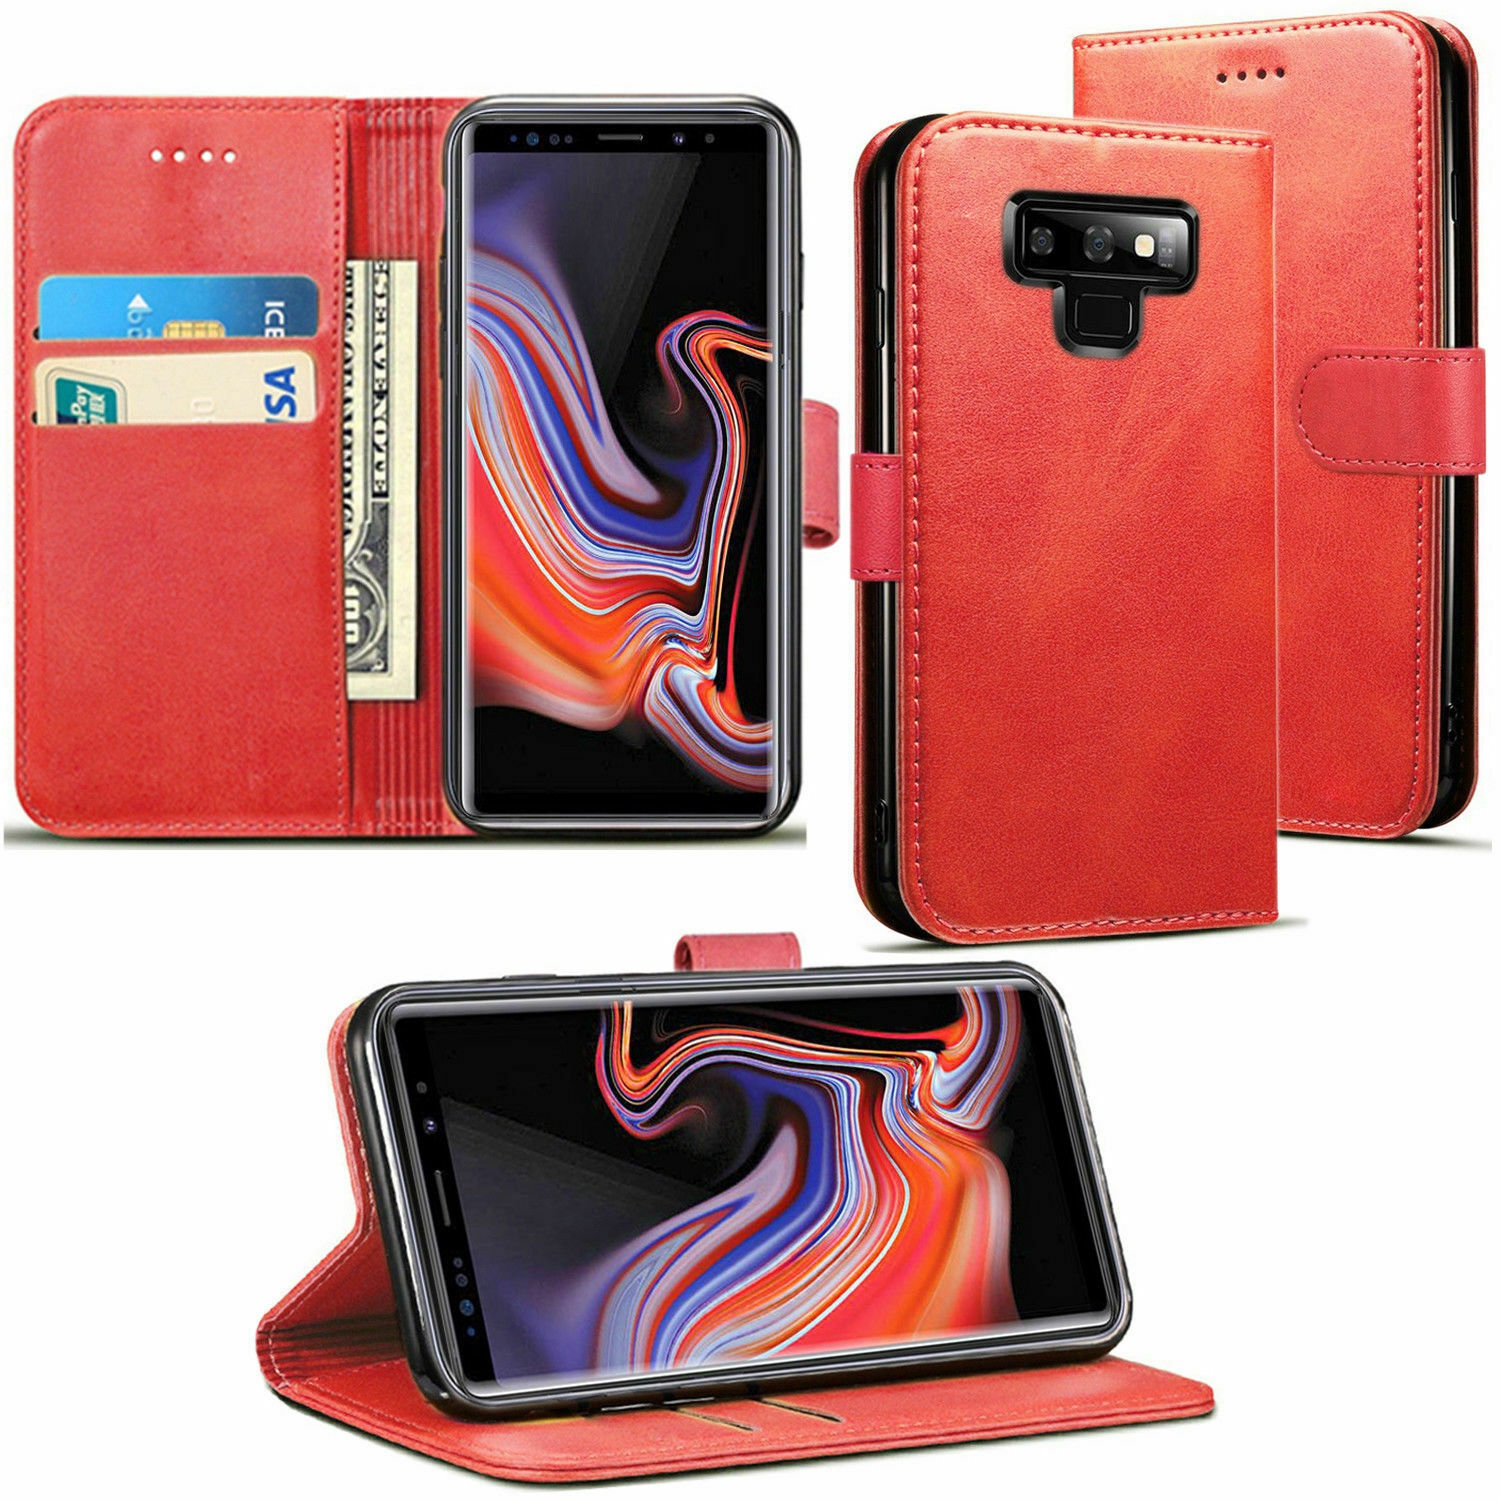 【CSmart】 Magnetic Card Slot Leather Folio Wallet Flip Case Cover for Samsung Galaxy Note 9, Red